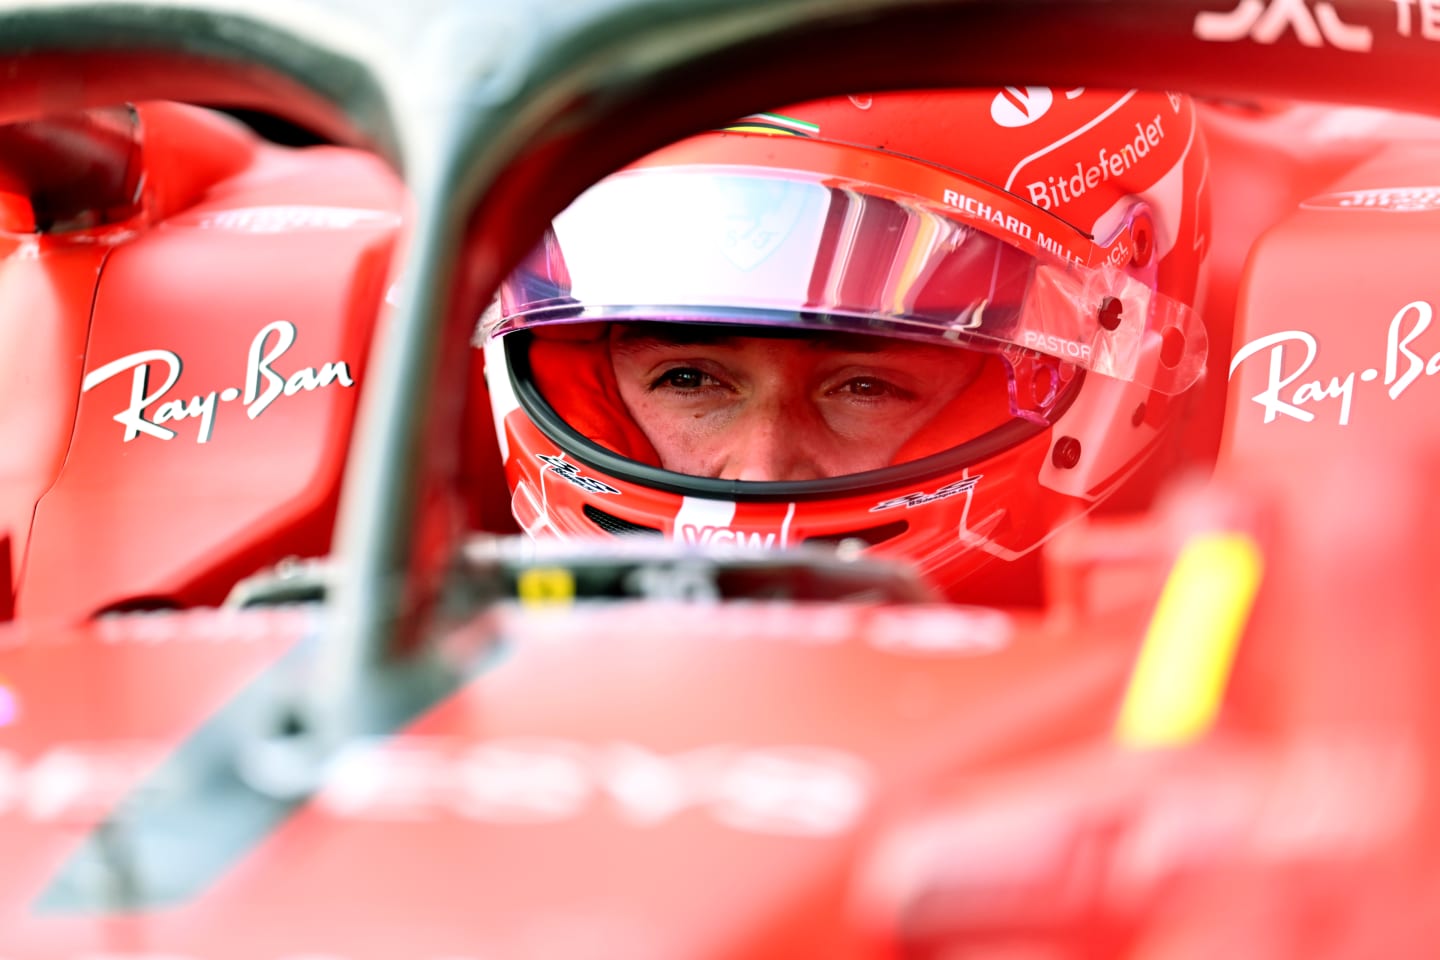 MONTREAL, QUEBEC - JUNE 16: Charles Leclerc of Monaco and Ferrari prepares to drive during practice ahead of the F1 Grand Prix of Canada at Circuit Gilles Villeneuve on June 16, 2023 in Montreal, Quebec. (Photo by Dan Mullan/Getty Images)